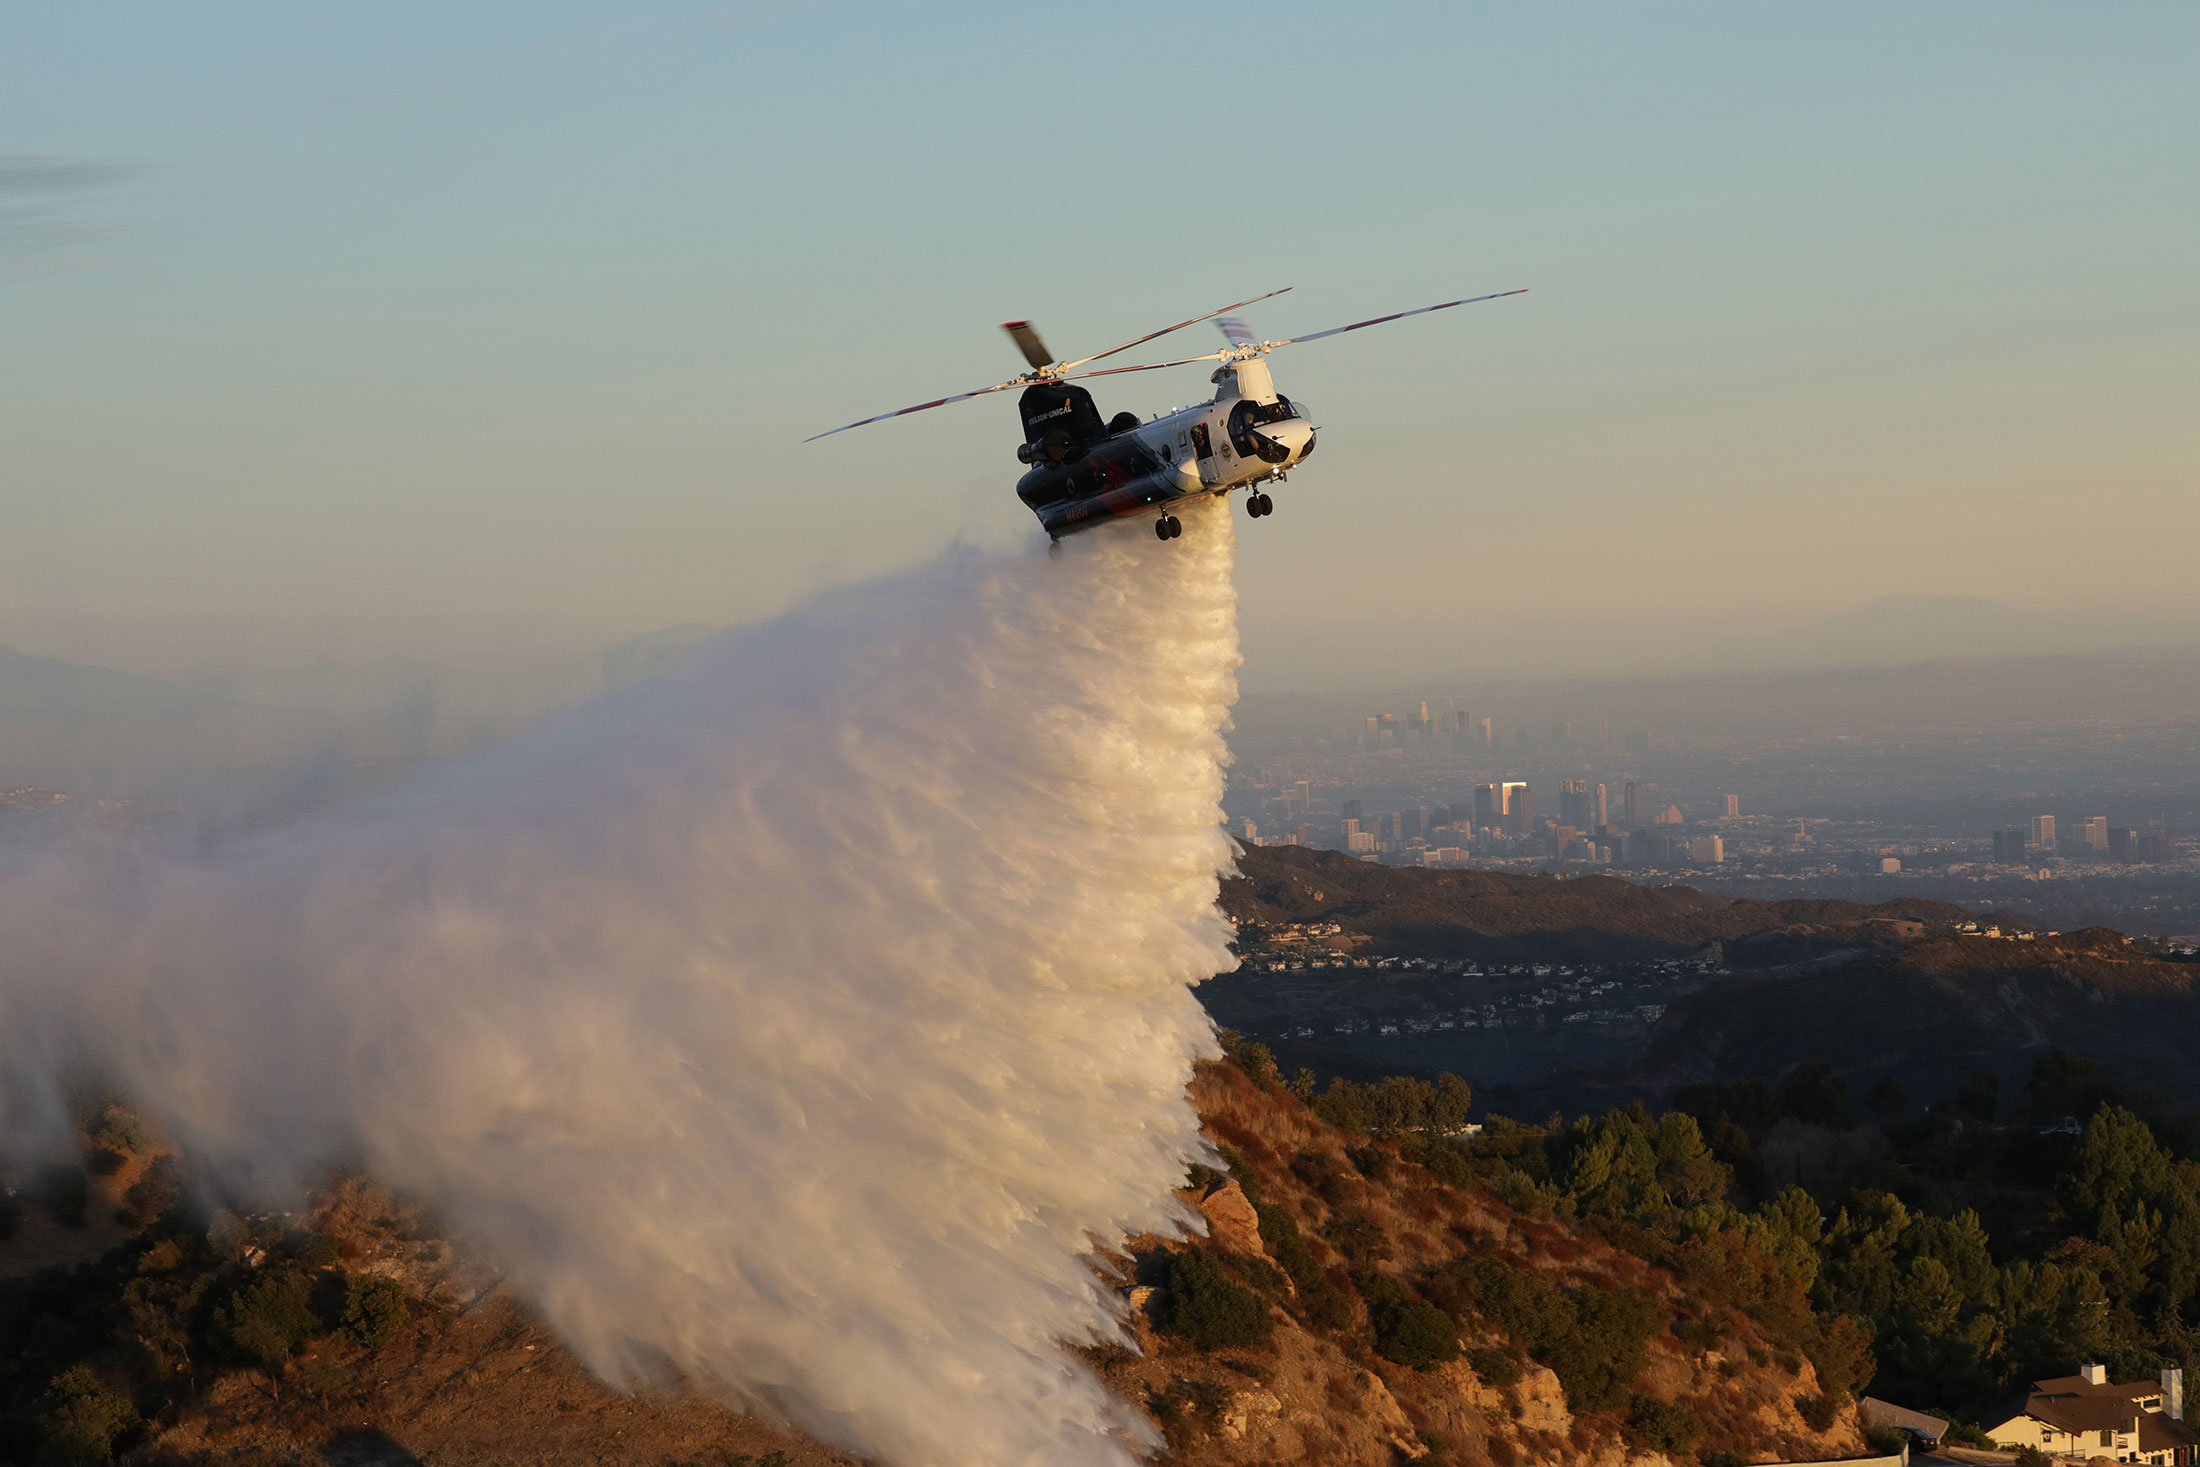 Image of Forest fire with a helicopter